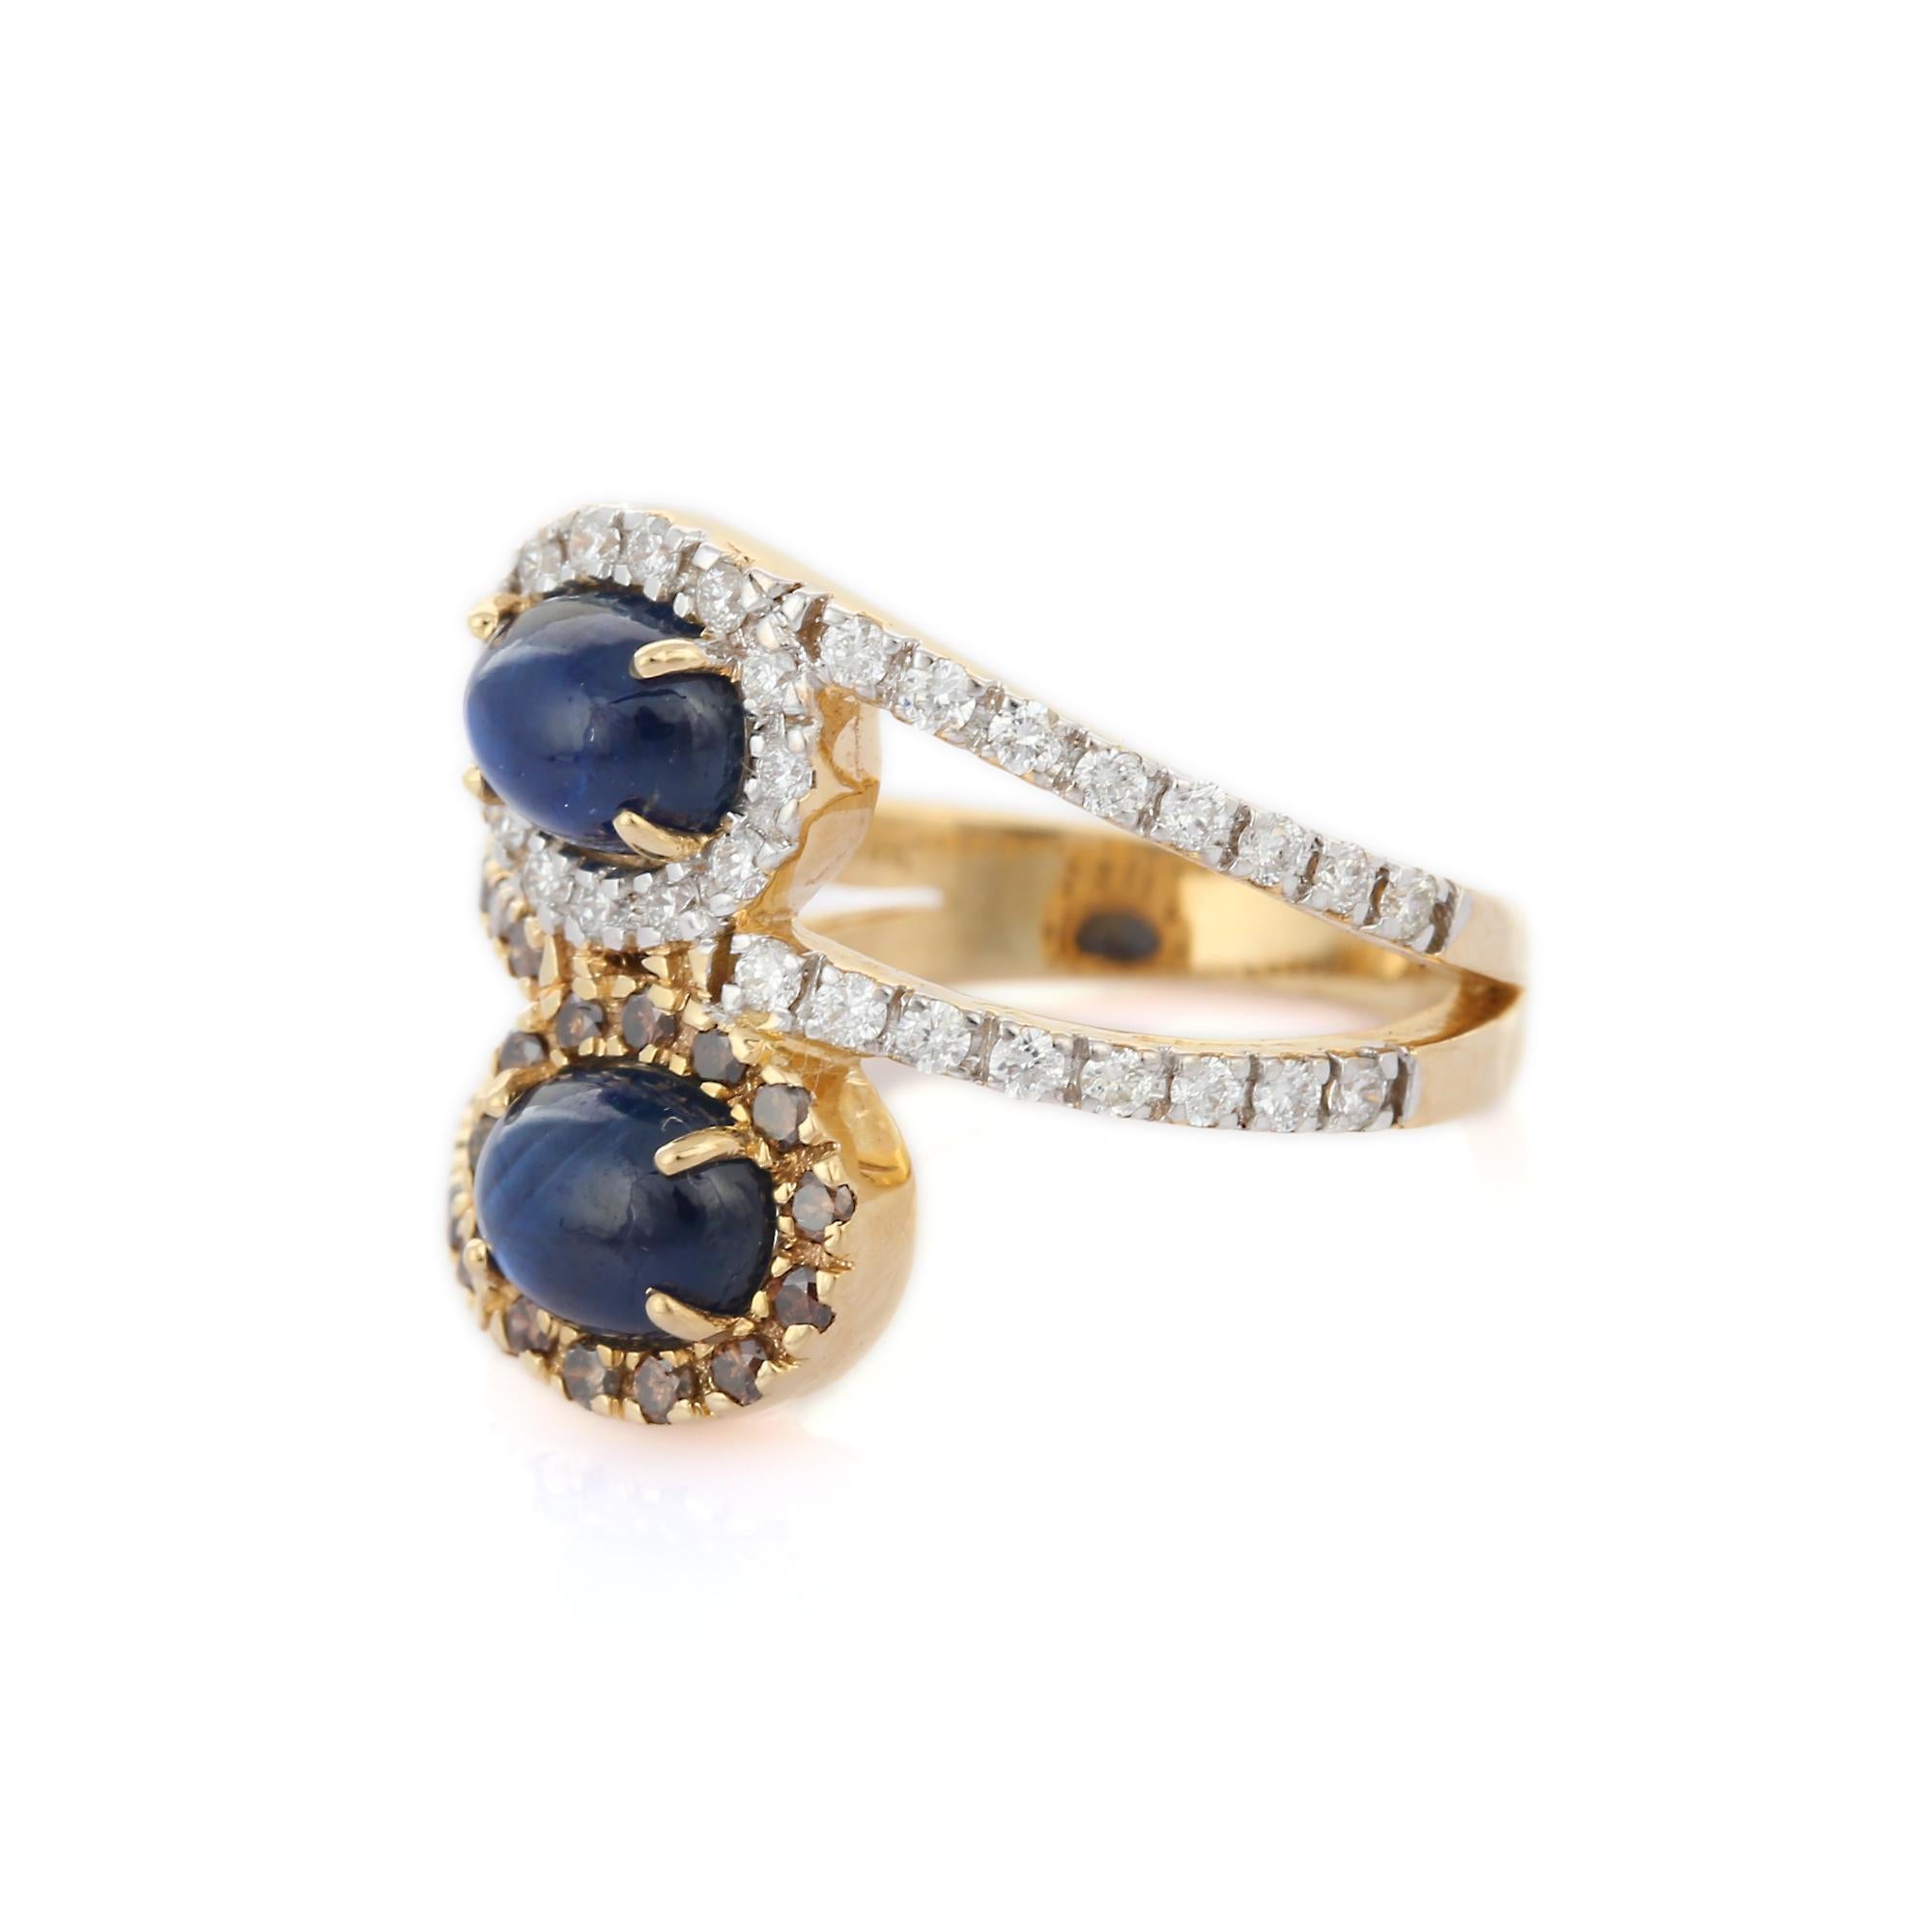 For Sale:  Natural 2.7 ct Blue Sapphire Bypass Wrap Ring with Diamonds in 14K White Gold 3